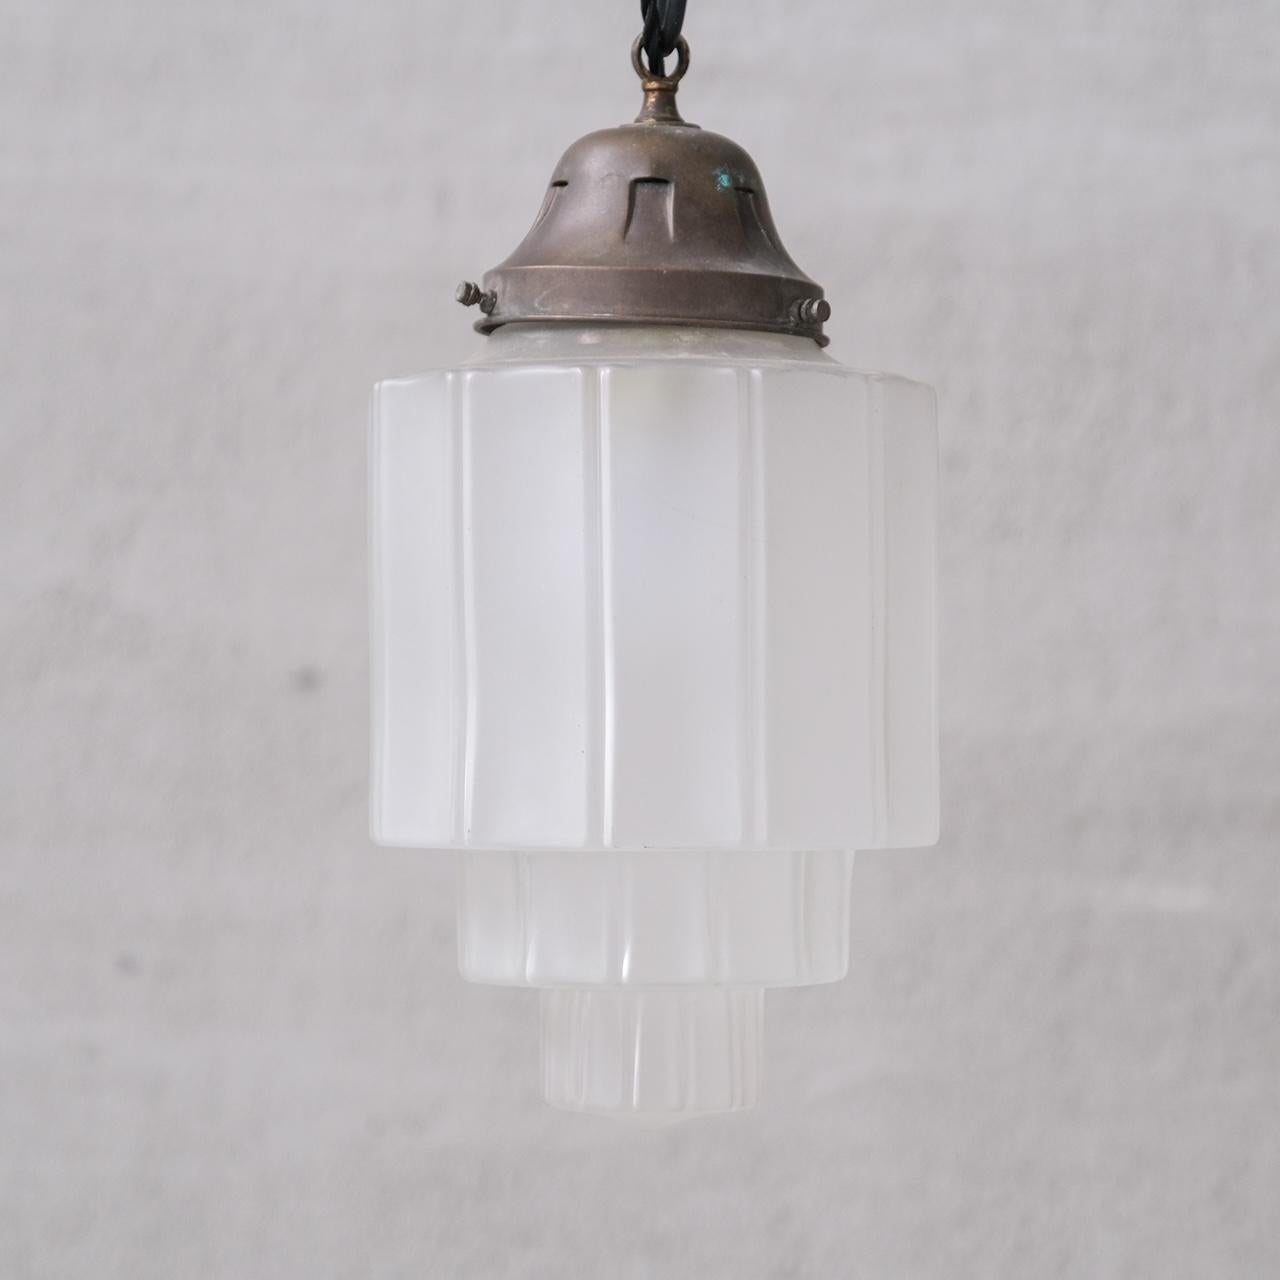 An opaque glass pendant light, often labelled as 'sky scraper' pendants.

France, c1920s.

Stepped design.

No chain or rose was retained, however they are easy to source online.

Good vintage condtion, re-wired and PAT tested.

Location: Belgium